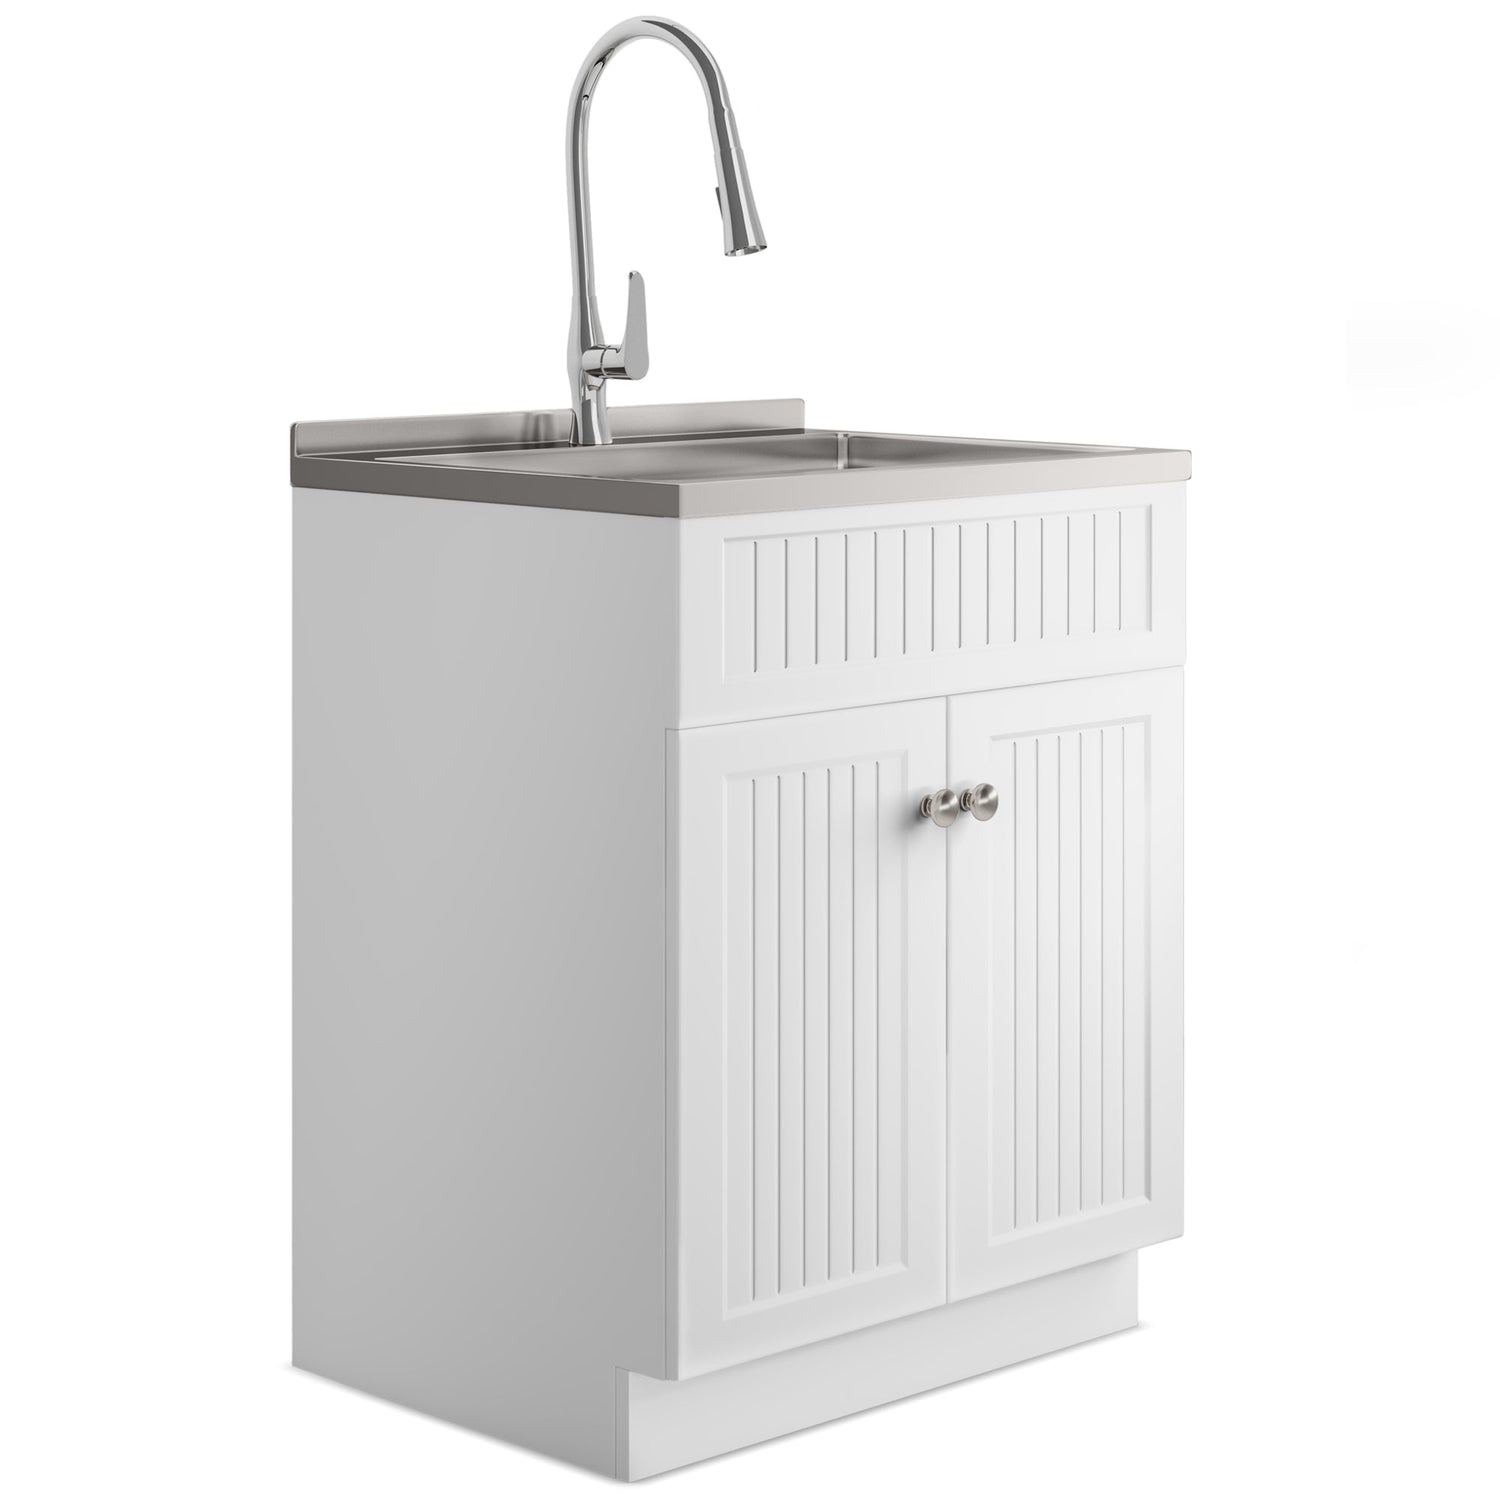 Beckham 28 inch Laundry Cabinet with Faucet and Stainless Steel Sink